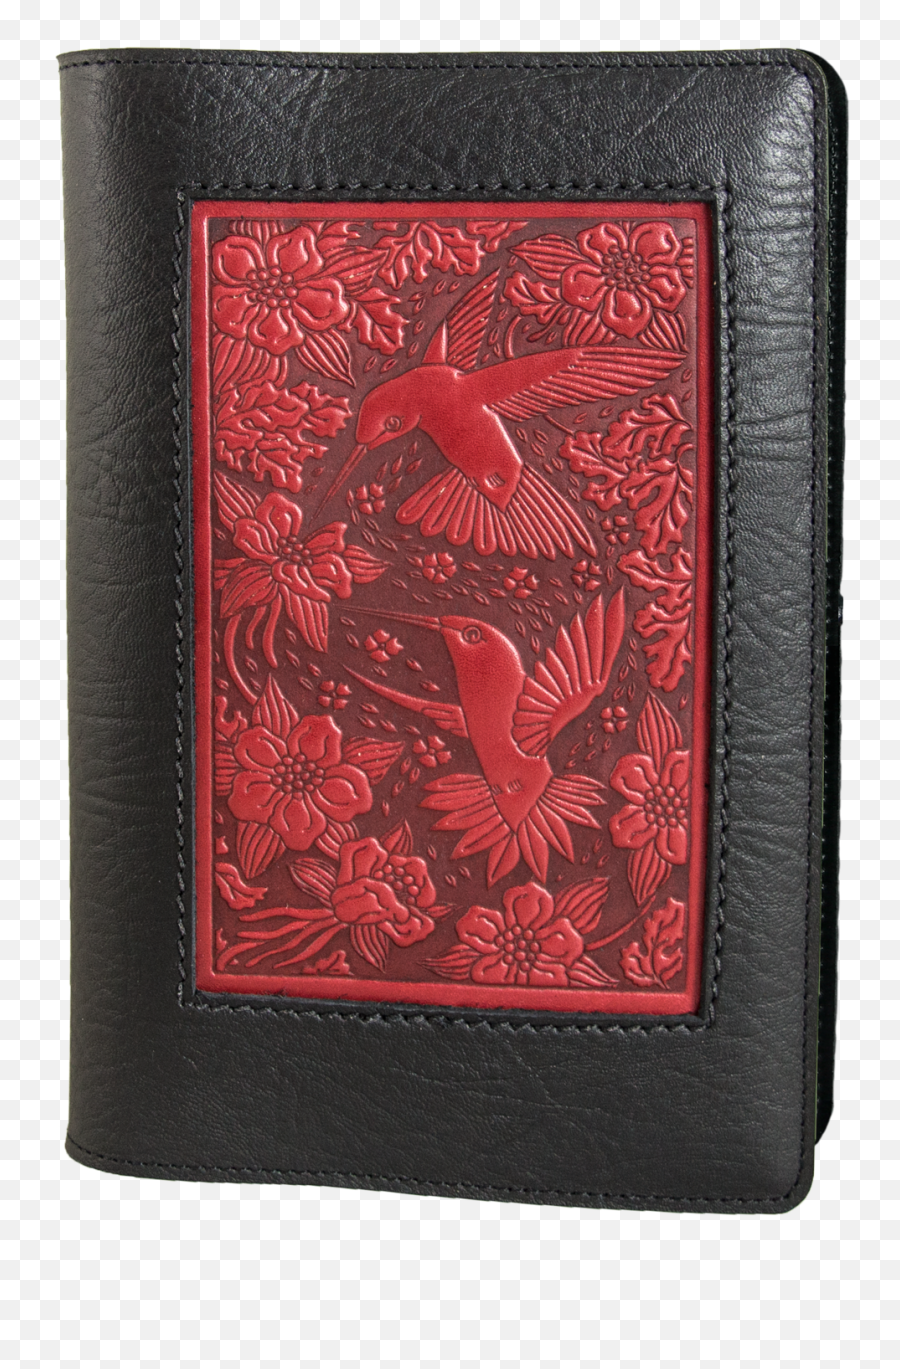 Oberon Design Premium Leather Womenu0027s Wallet Sunflower - Songbirds Png,Bungeecord Icon